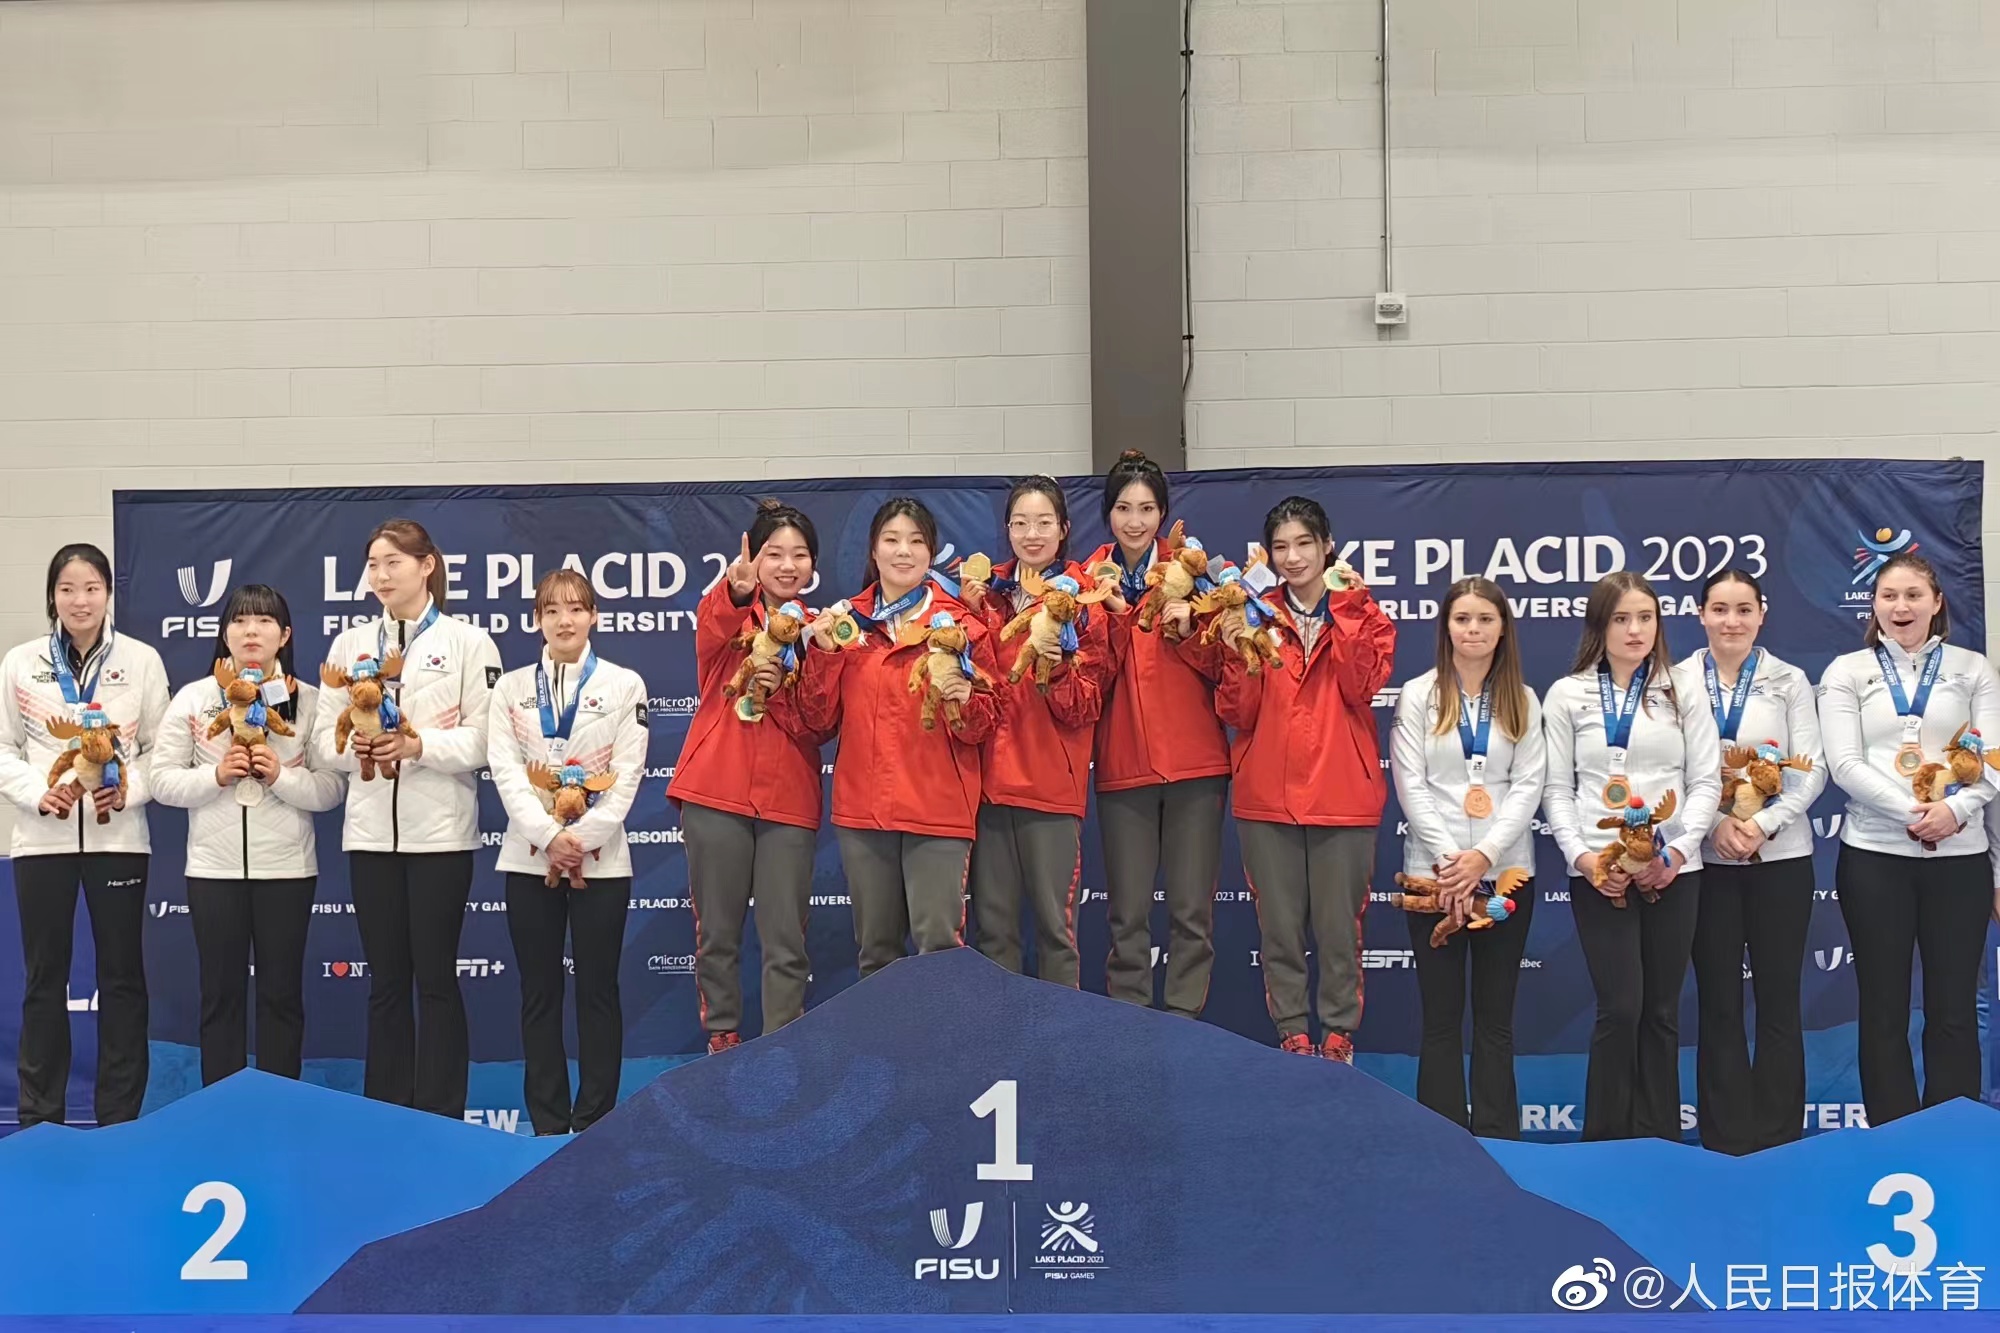 China's women's curling team take the gold medal at the award ceremony of the 31st Winter World University Games in Lake Placid, the U.S., January 21, 2023. /People's Daily Sports